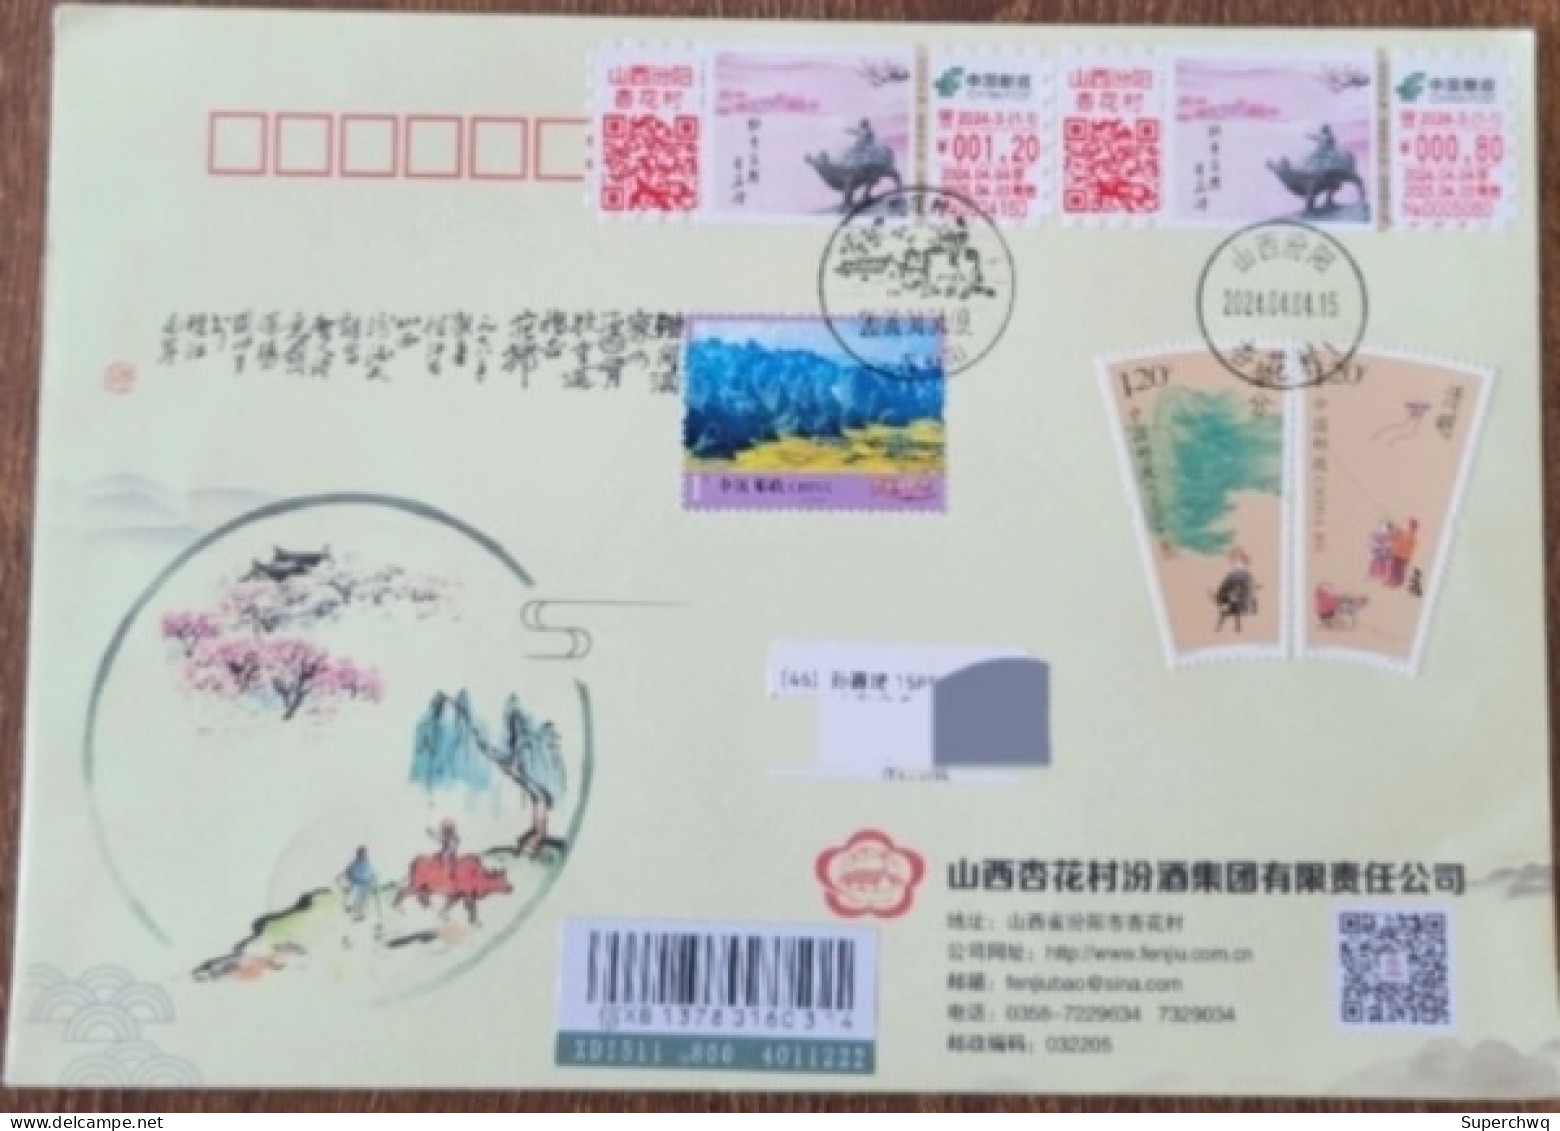 China Cover "Shepherd Boy Pointing To Apricot Blossom Village" (Fenyang, Shanxi) Postage Label, First Day Registered And - Omslagen